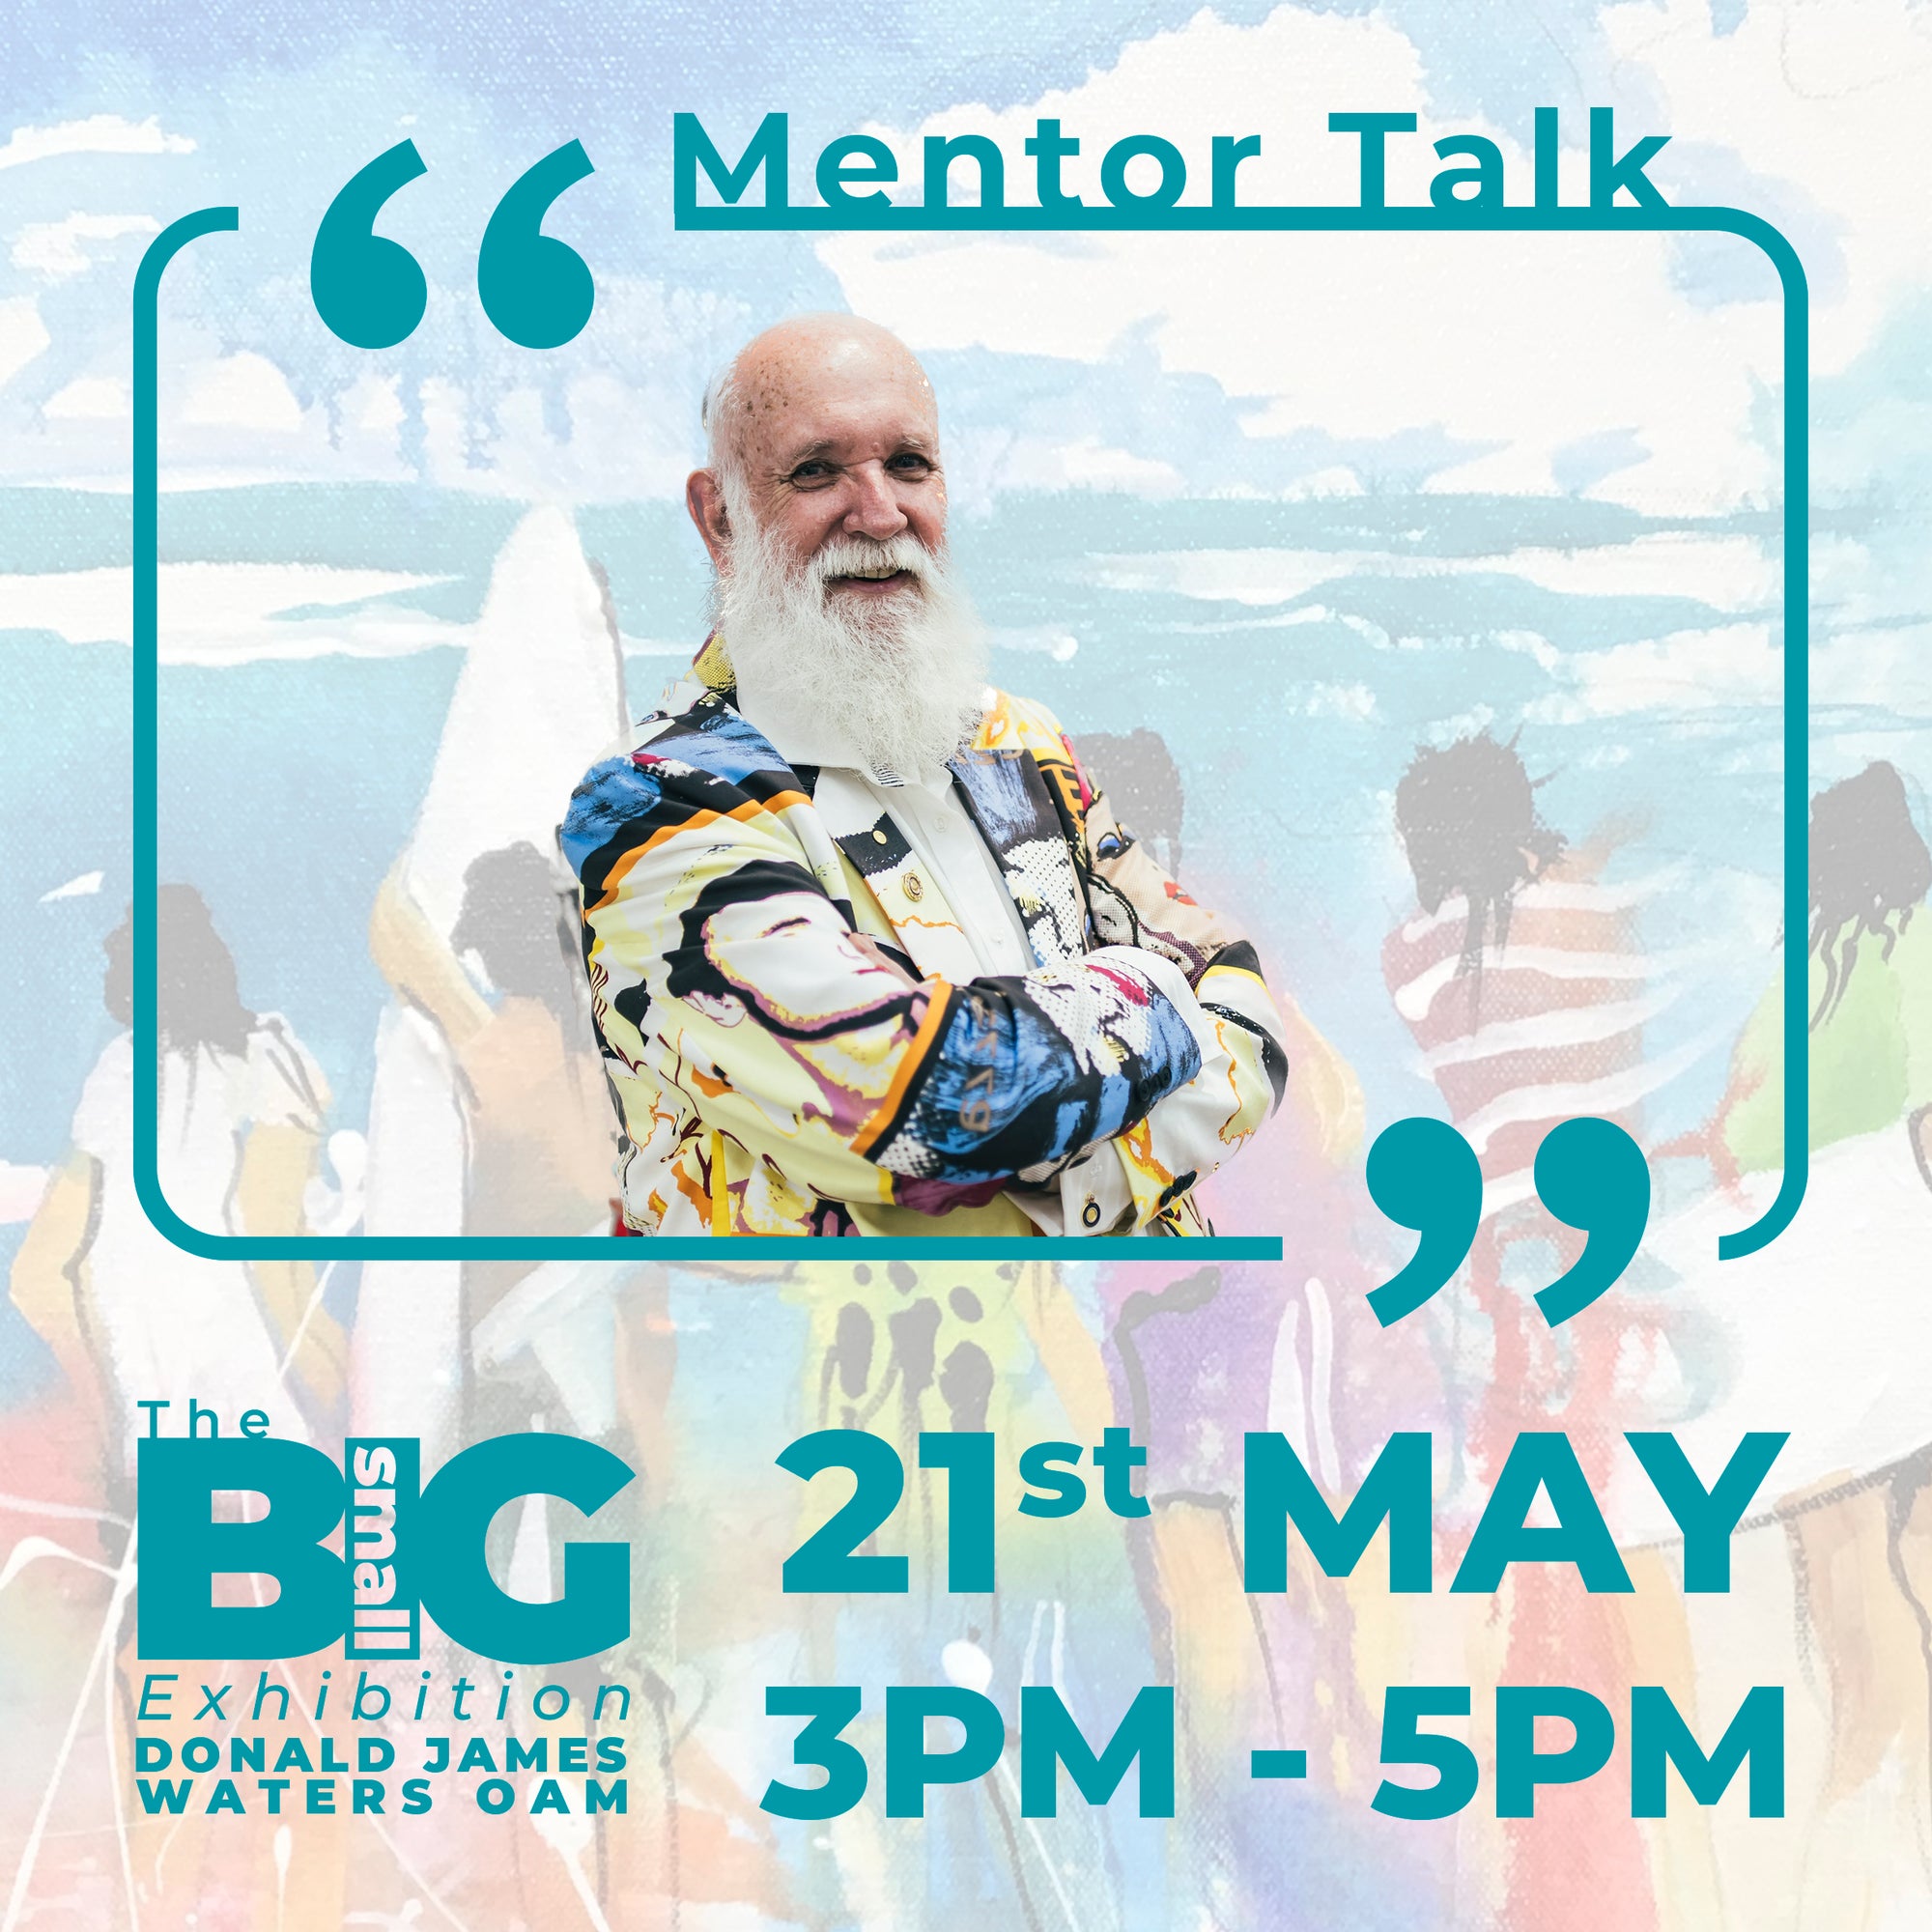 Mentor Talk: ‘THE BIG small EXHIBITION’ - Donald James Waters OAM